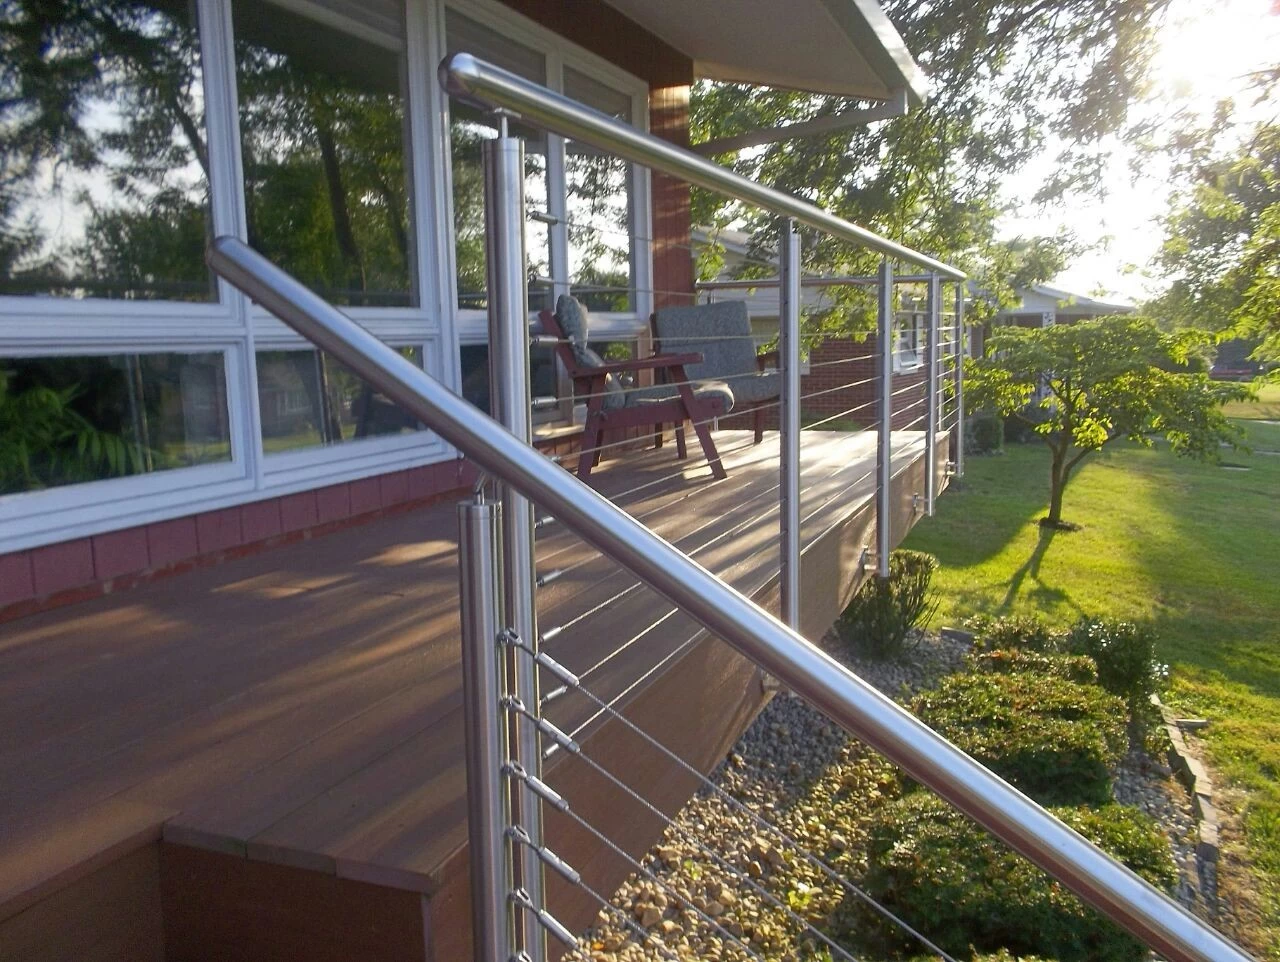 Side mounted / flooring stainless steel balustrade for balcony and